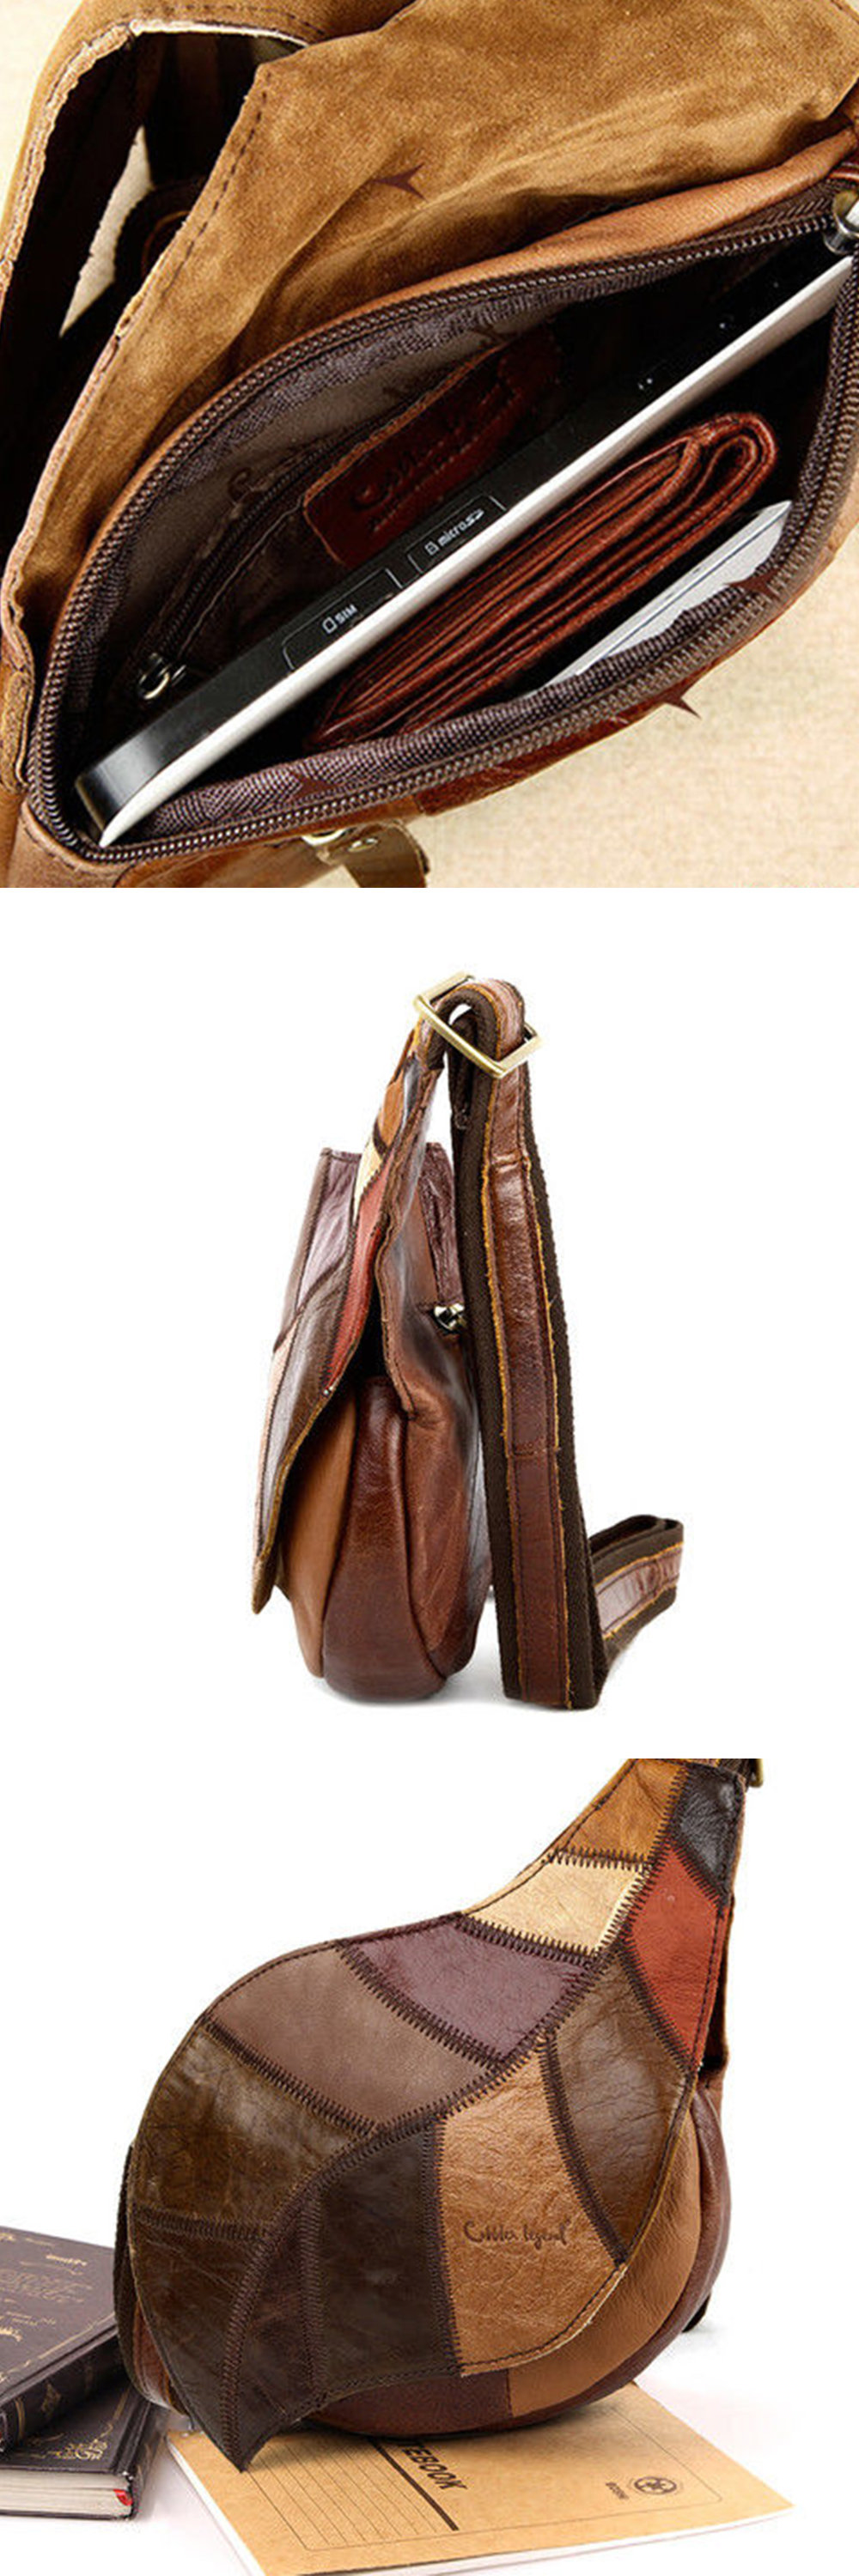 Vintage Messenger Bag - Faux Leather - Brown from Apollo Box